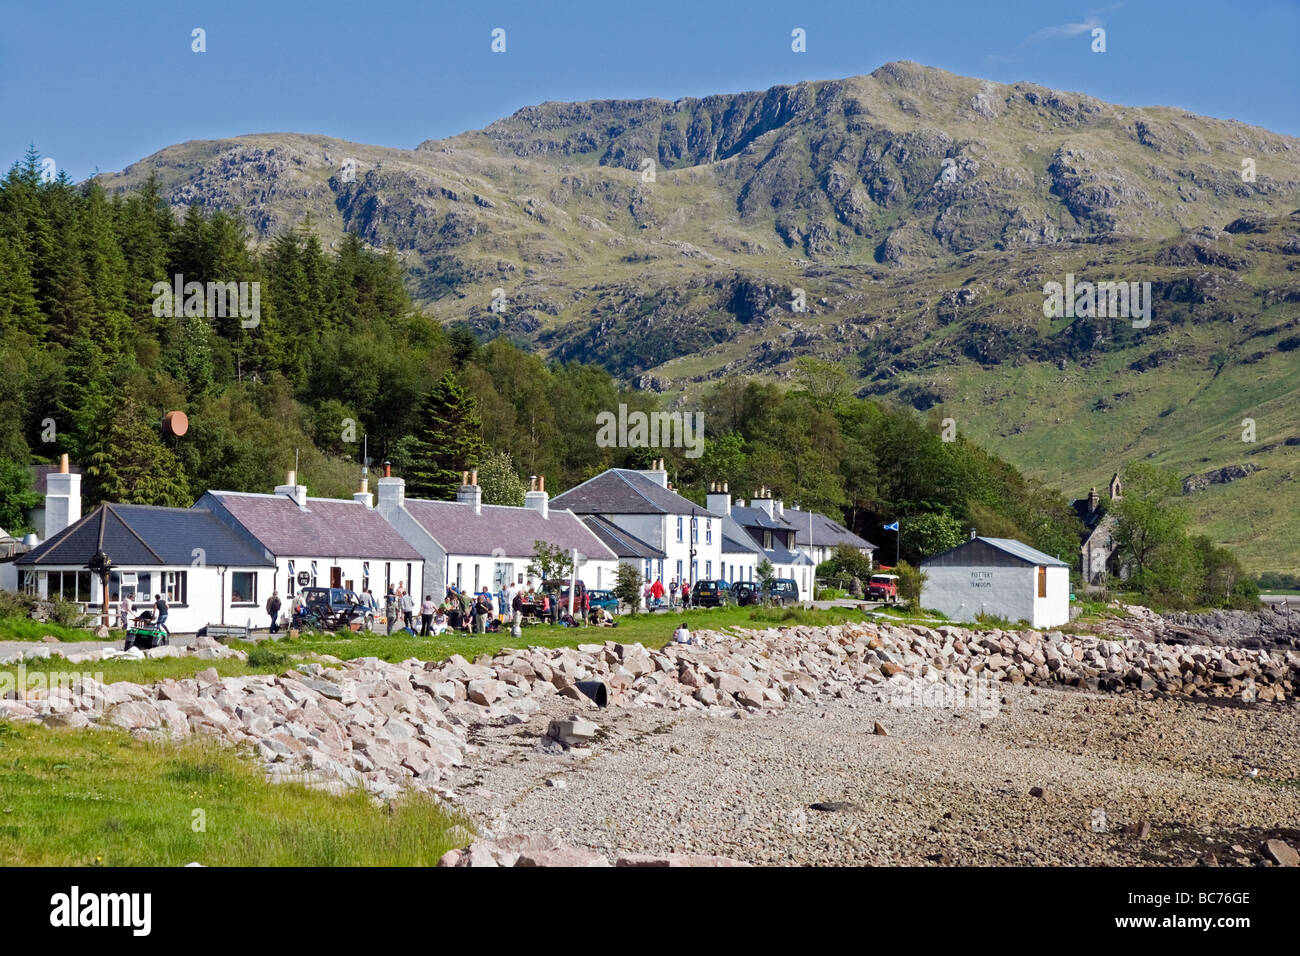 The village of Inverie in Inverie Bay Loch Nevis on Knoydart the West Highlands of Scotland with visitors at The Old Forge Pub Stock Photo